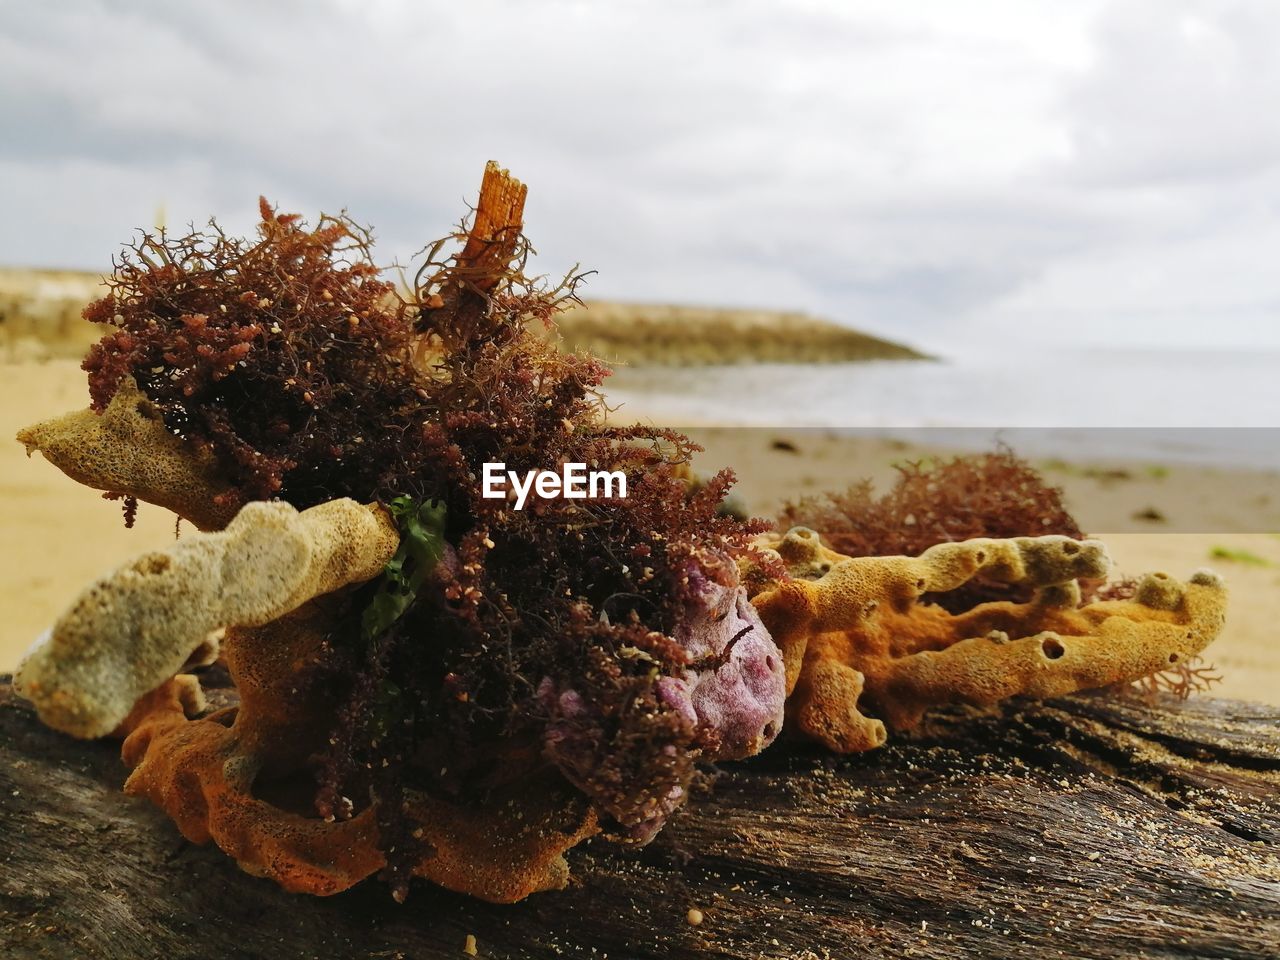 Soft coral with seaweed on the dry wood at the beach 